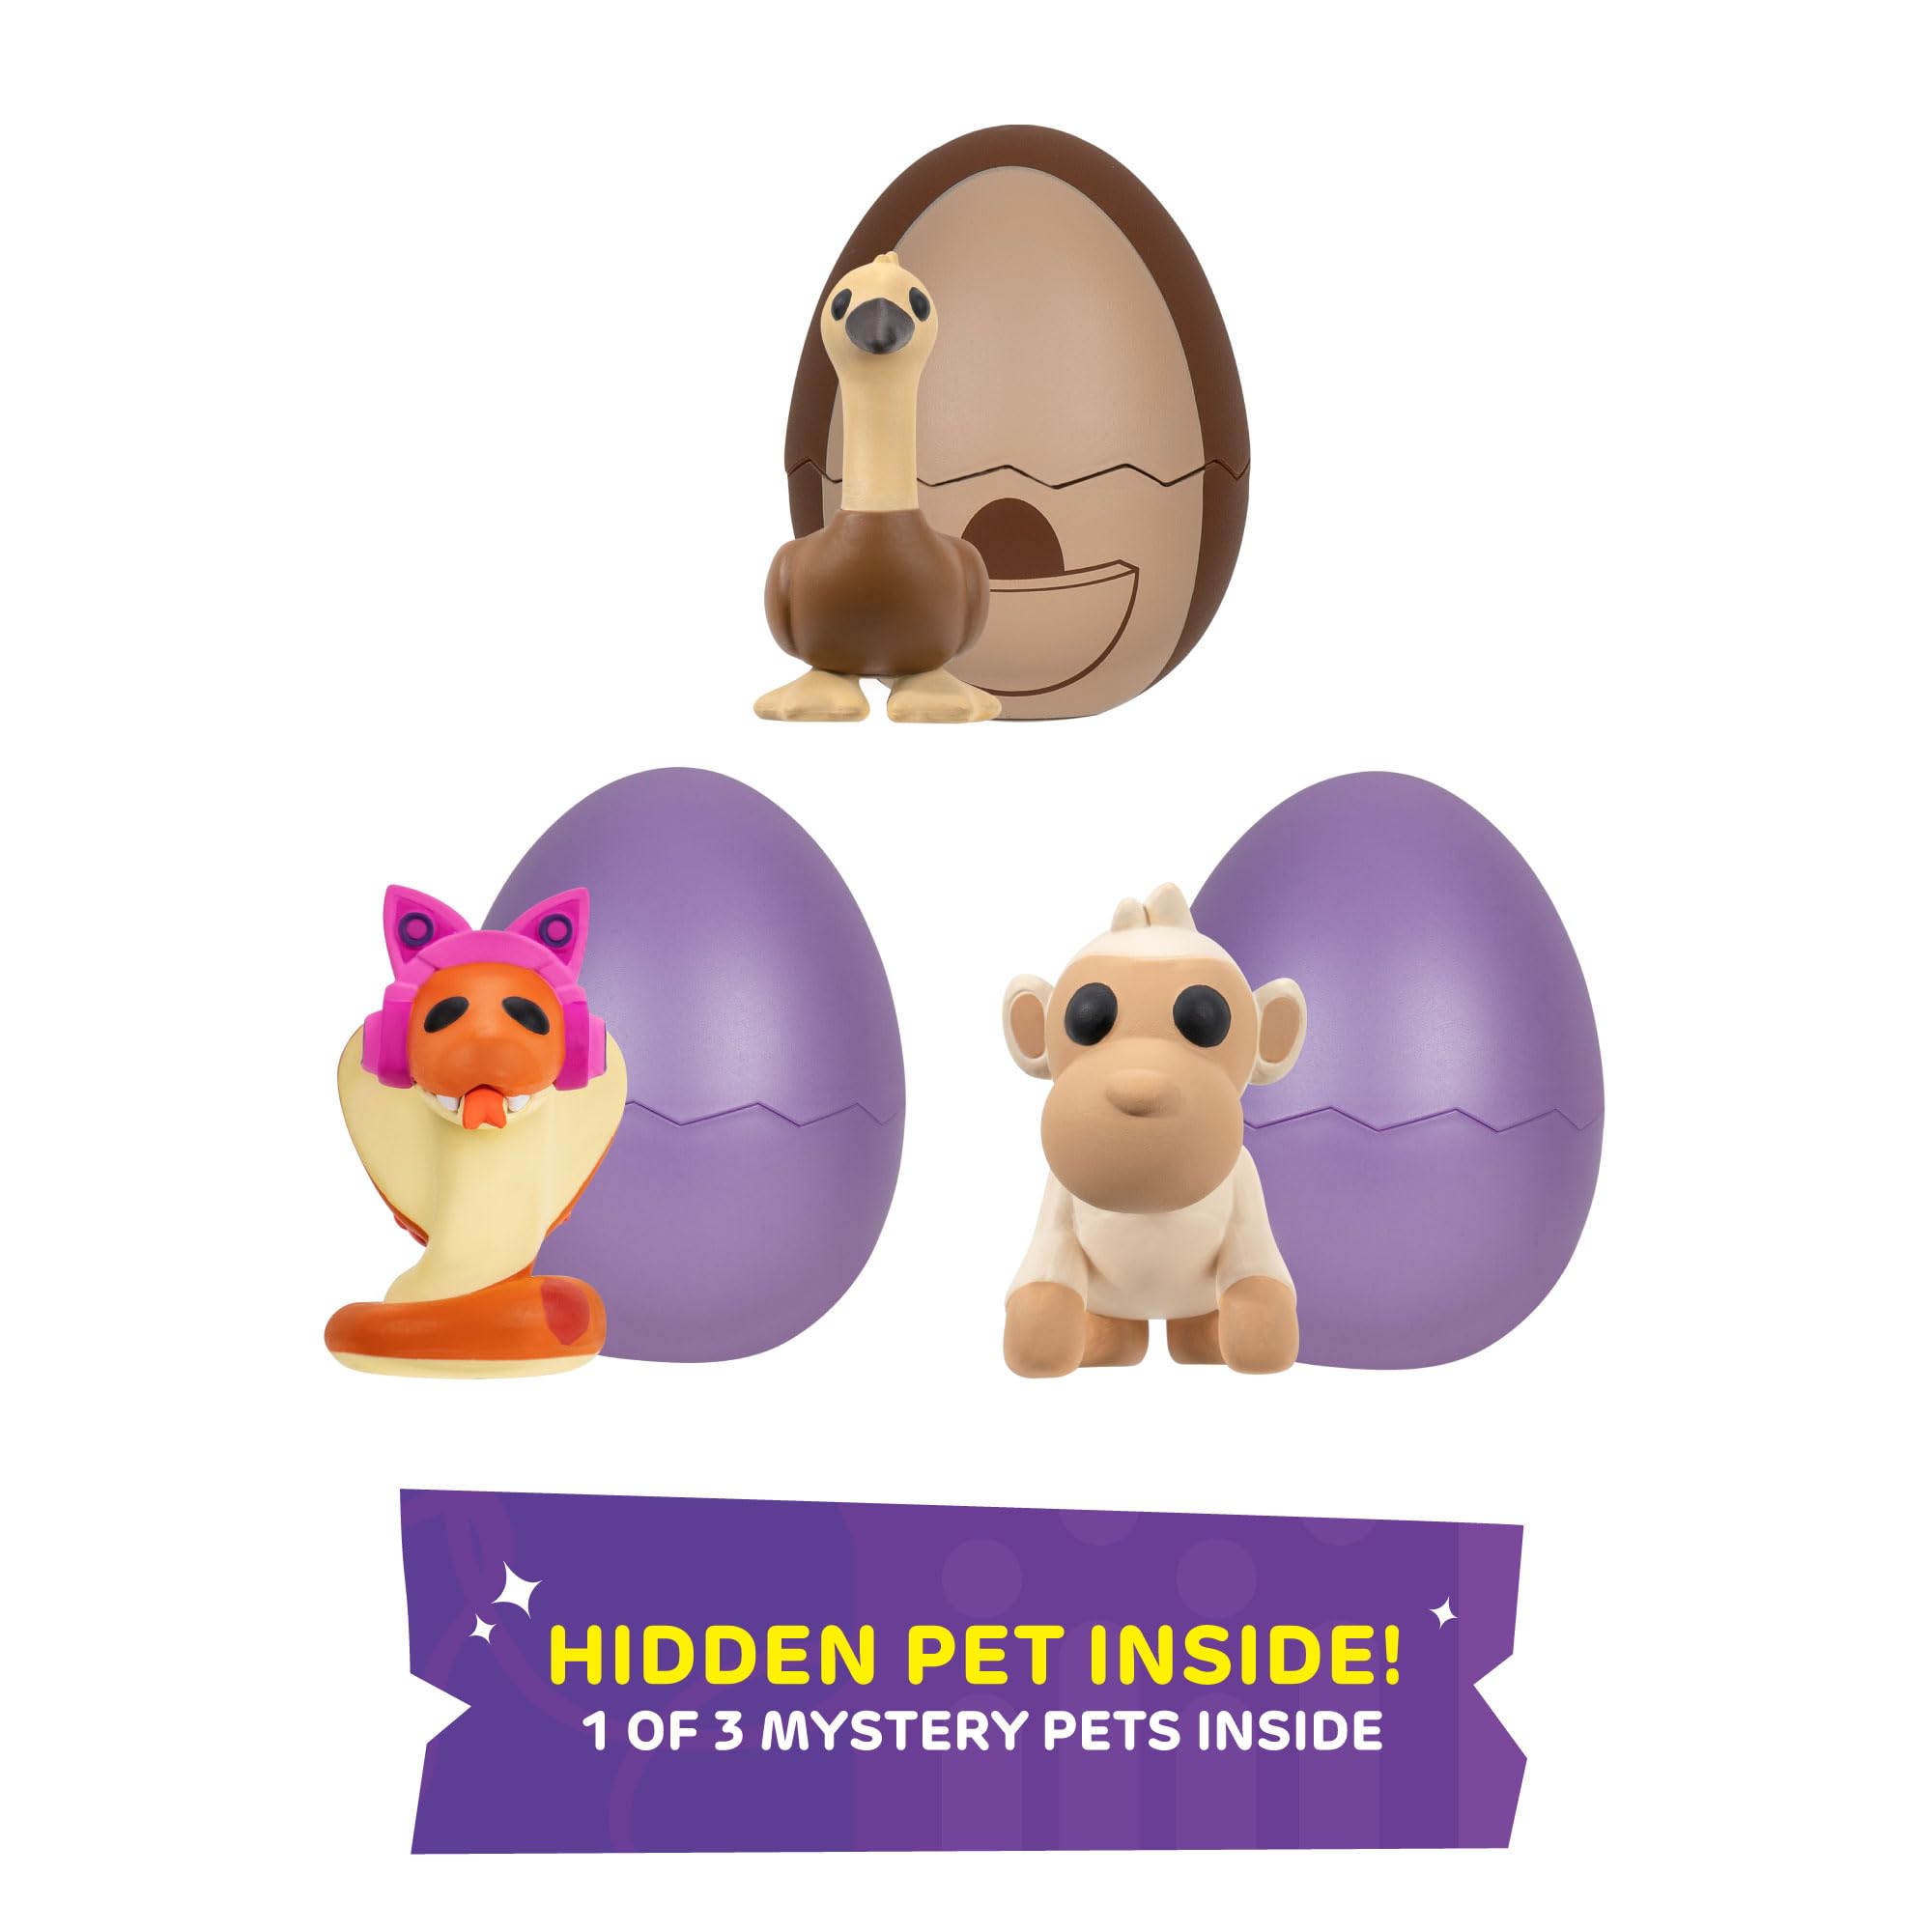 Adopt Me! Pets Multipack Animal Life - Hidden Pet - Top Online Game, Exclusive Virtual Item Code Included - Fun Collectible Toys for Kids Featuring Your Favorite Pets, Ages 6+